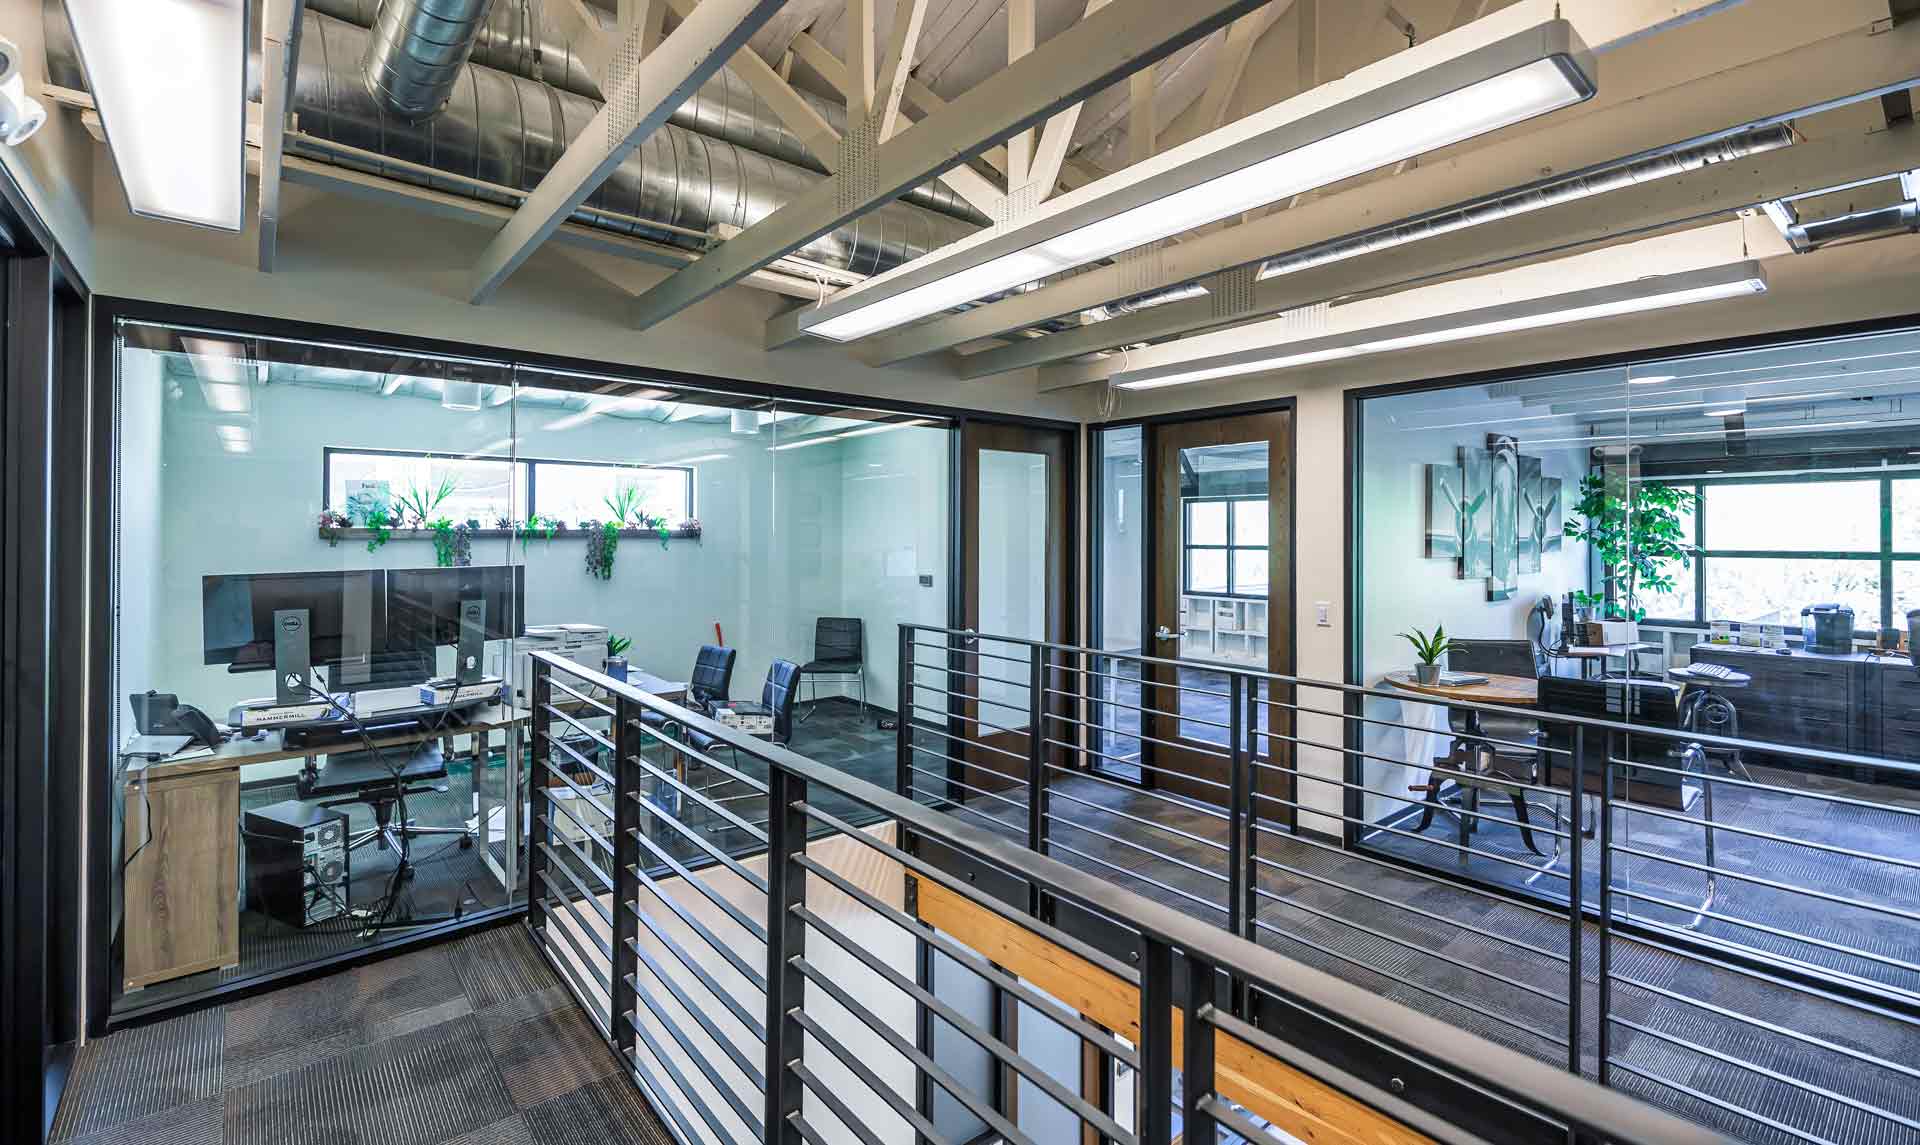 Coworking space in Phoenix. Availability includes office spaces and meeting rooms.